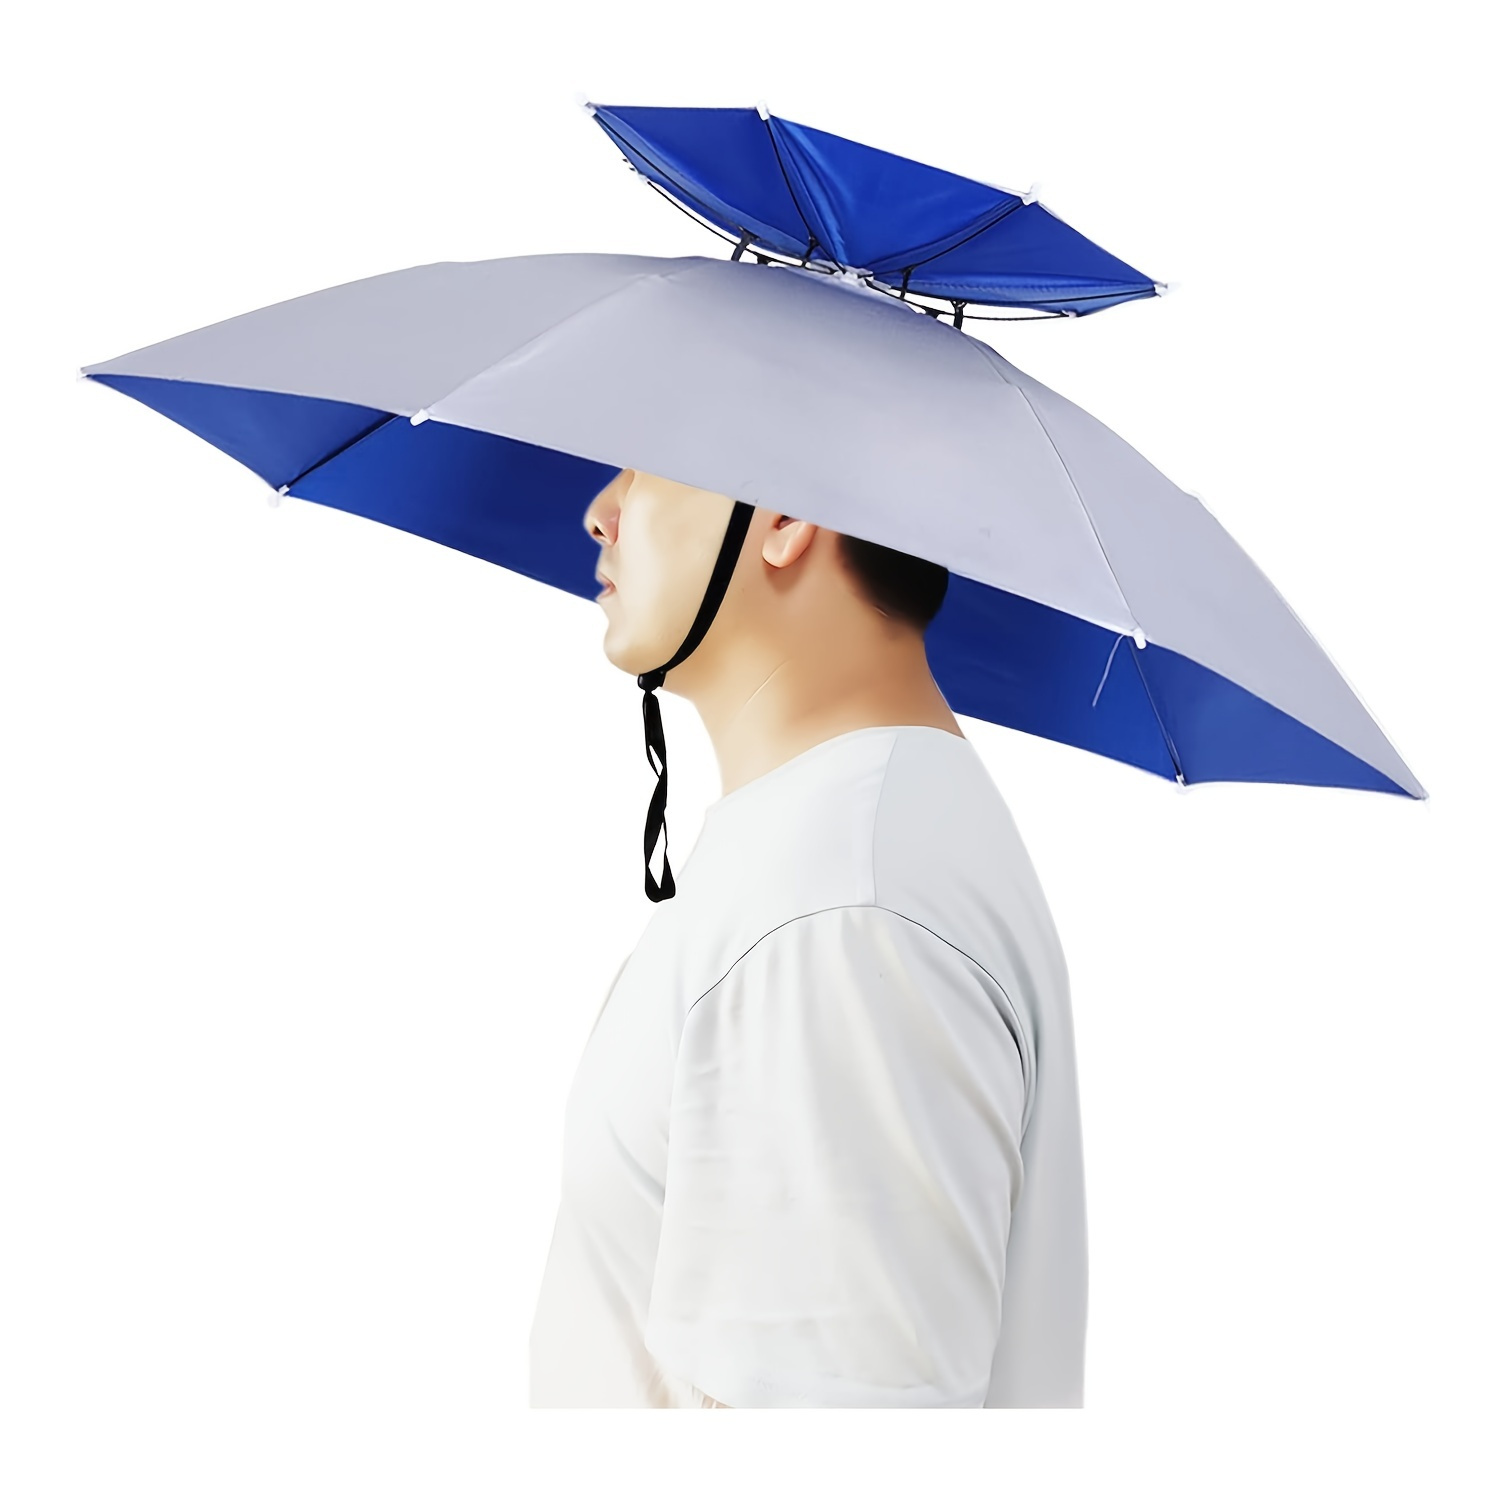 35 Inch Hands Free Foldable Anti UV Adjustable Umbrella Hat Suitable For Fishing Golf Camping Beach Gardening Sun Shade Outdoor